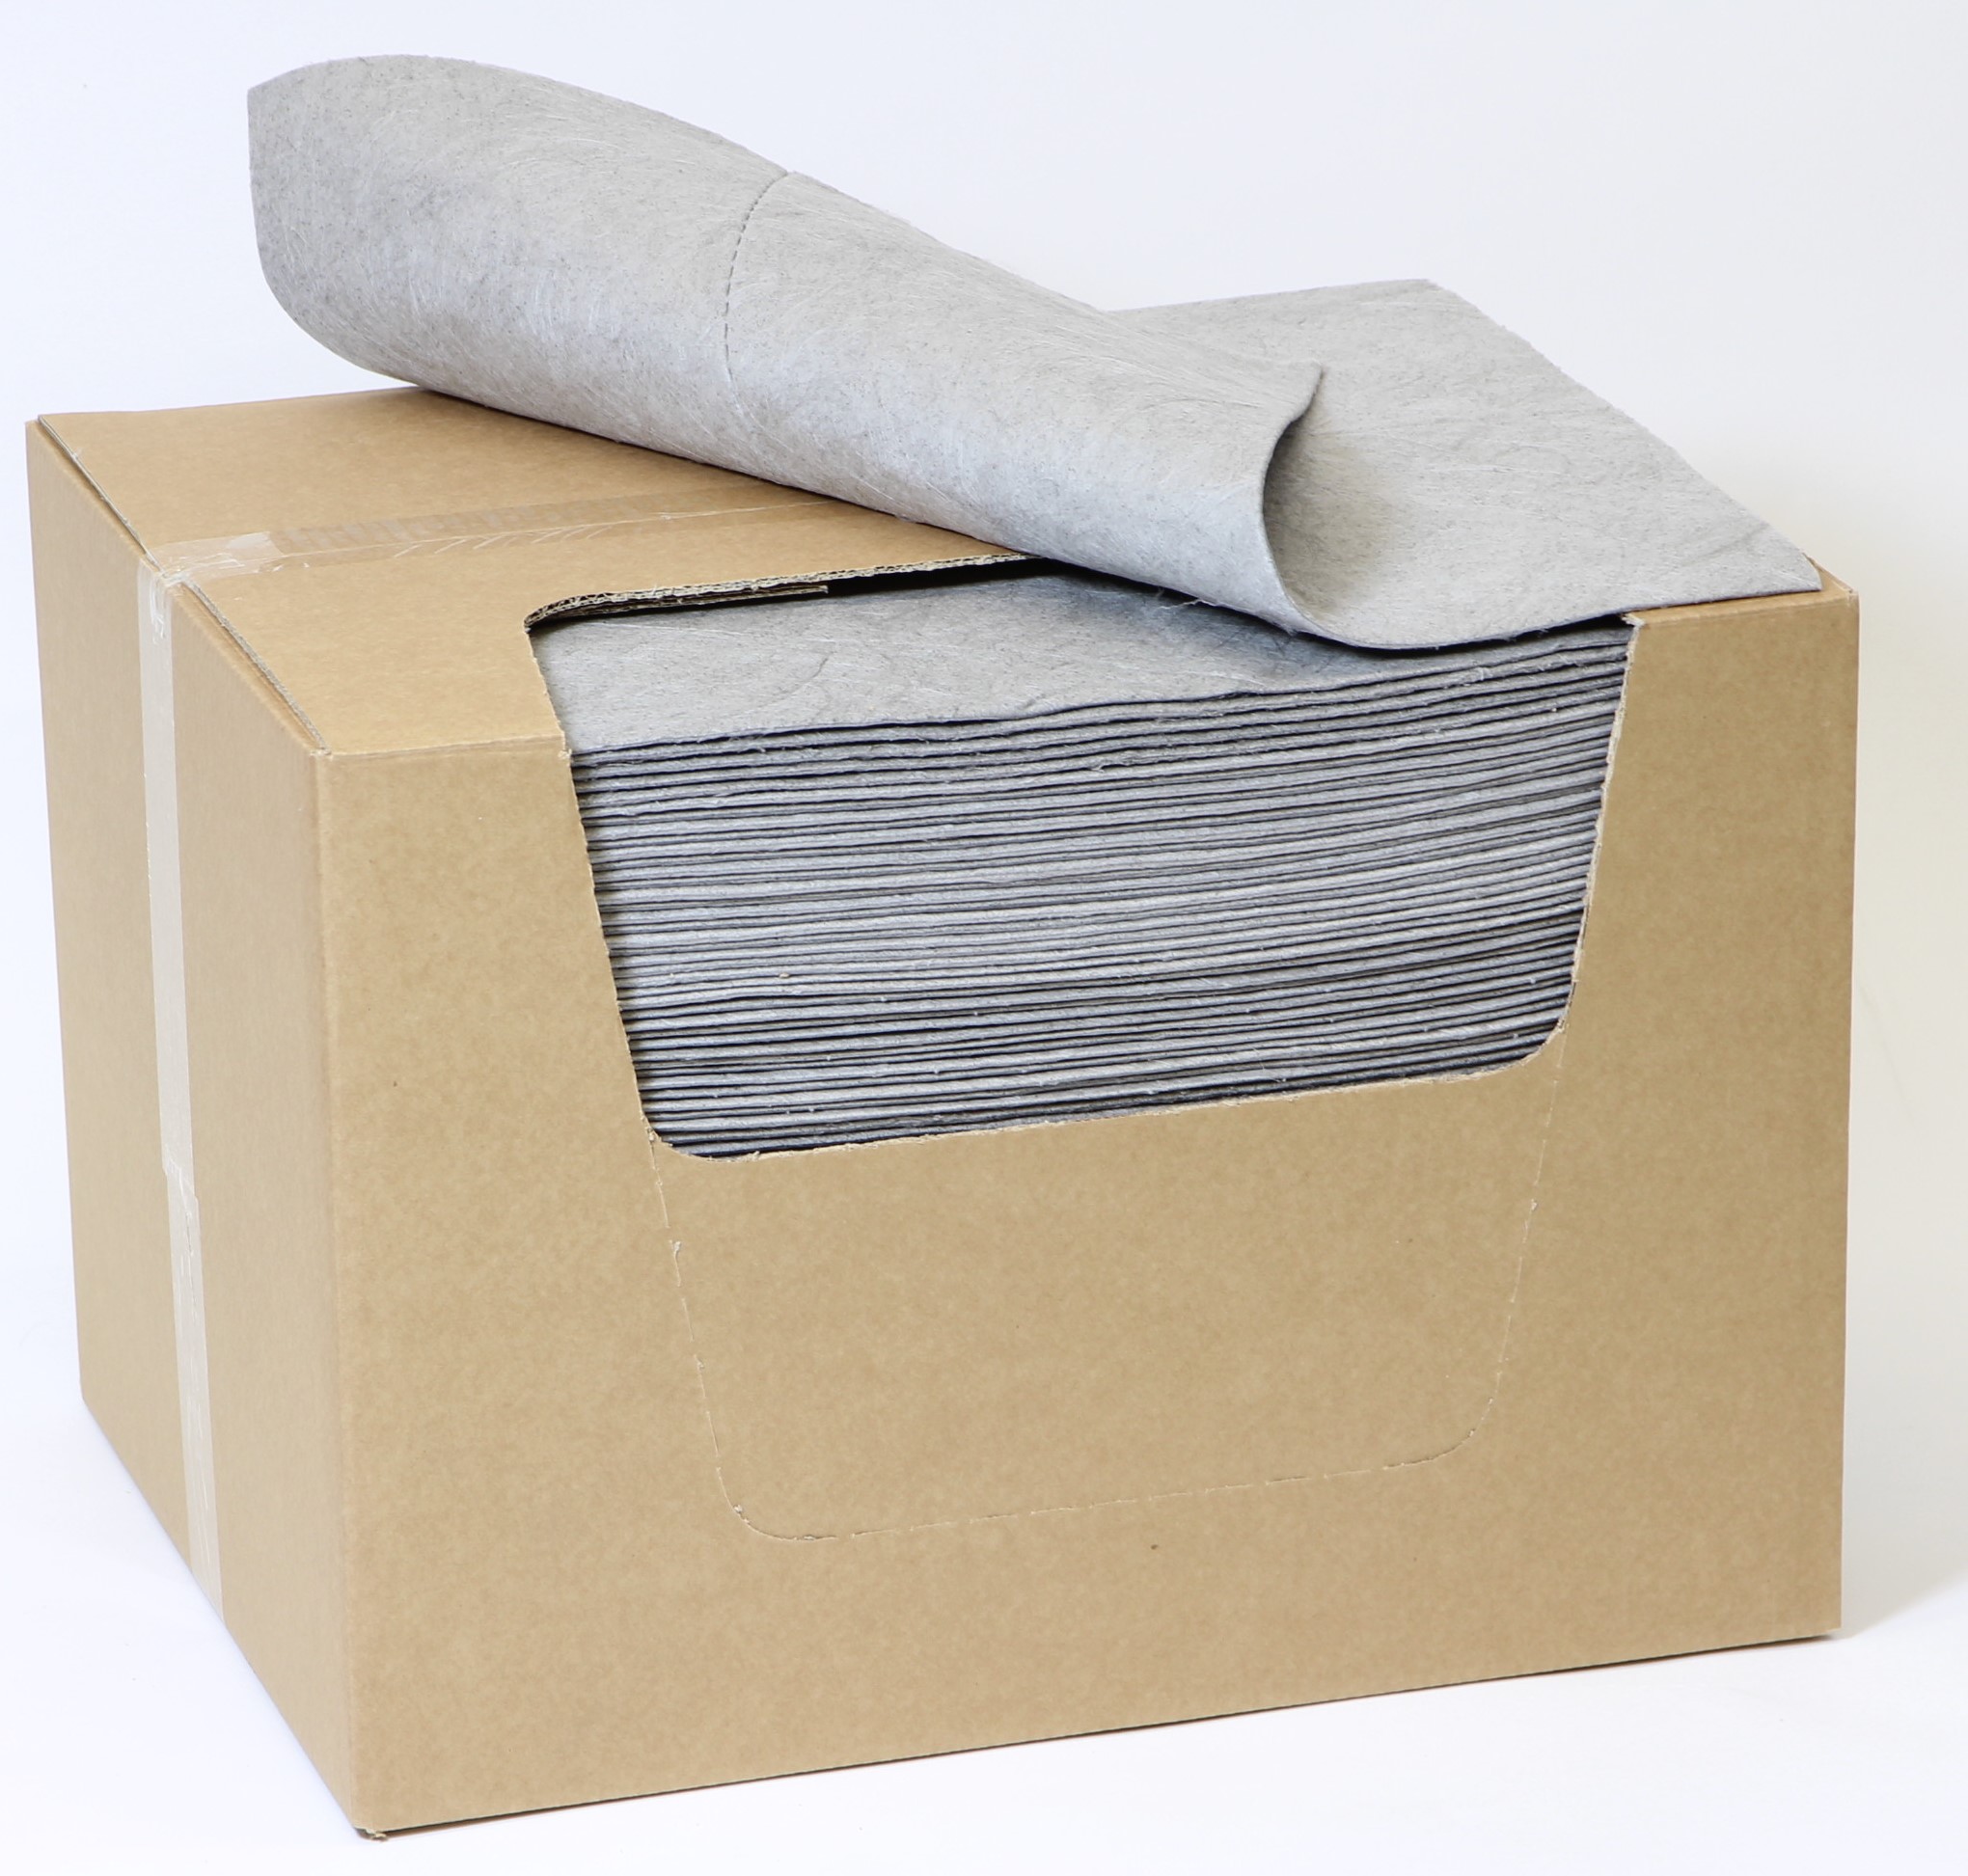 ICOSORB&#174; SMS HEAVY gray in a box